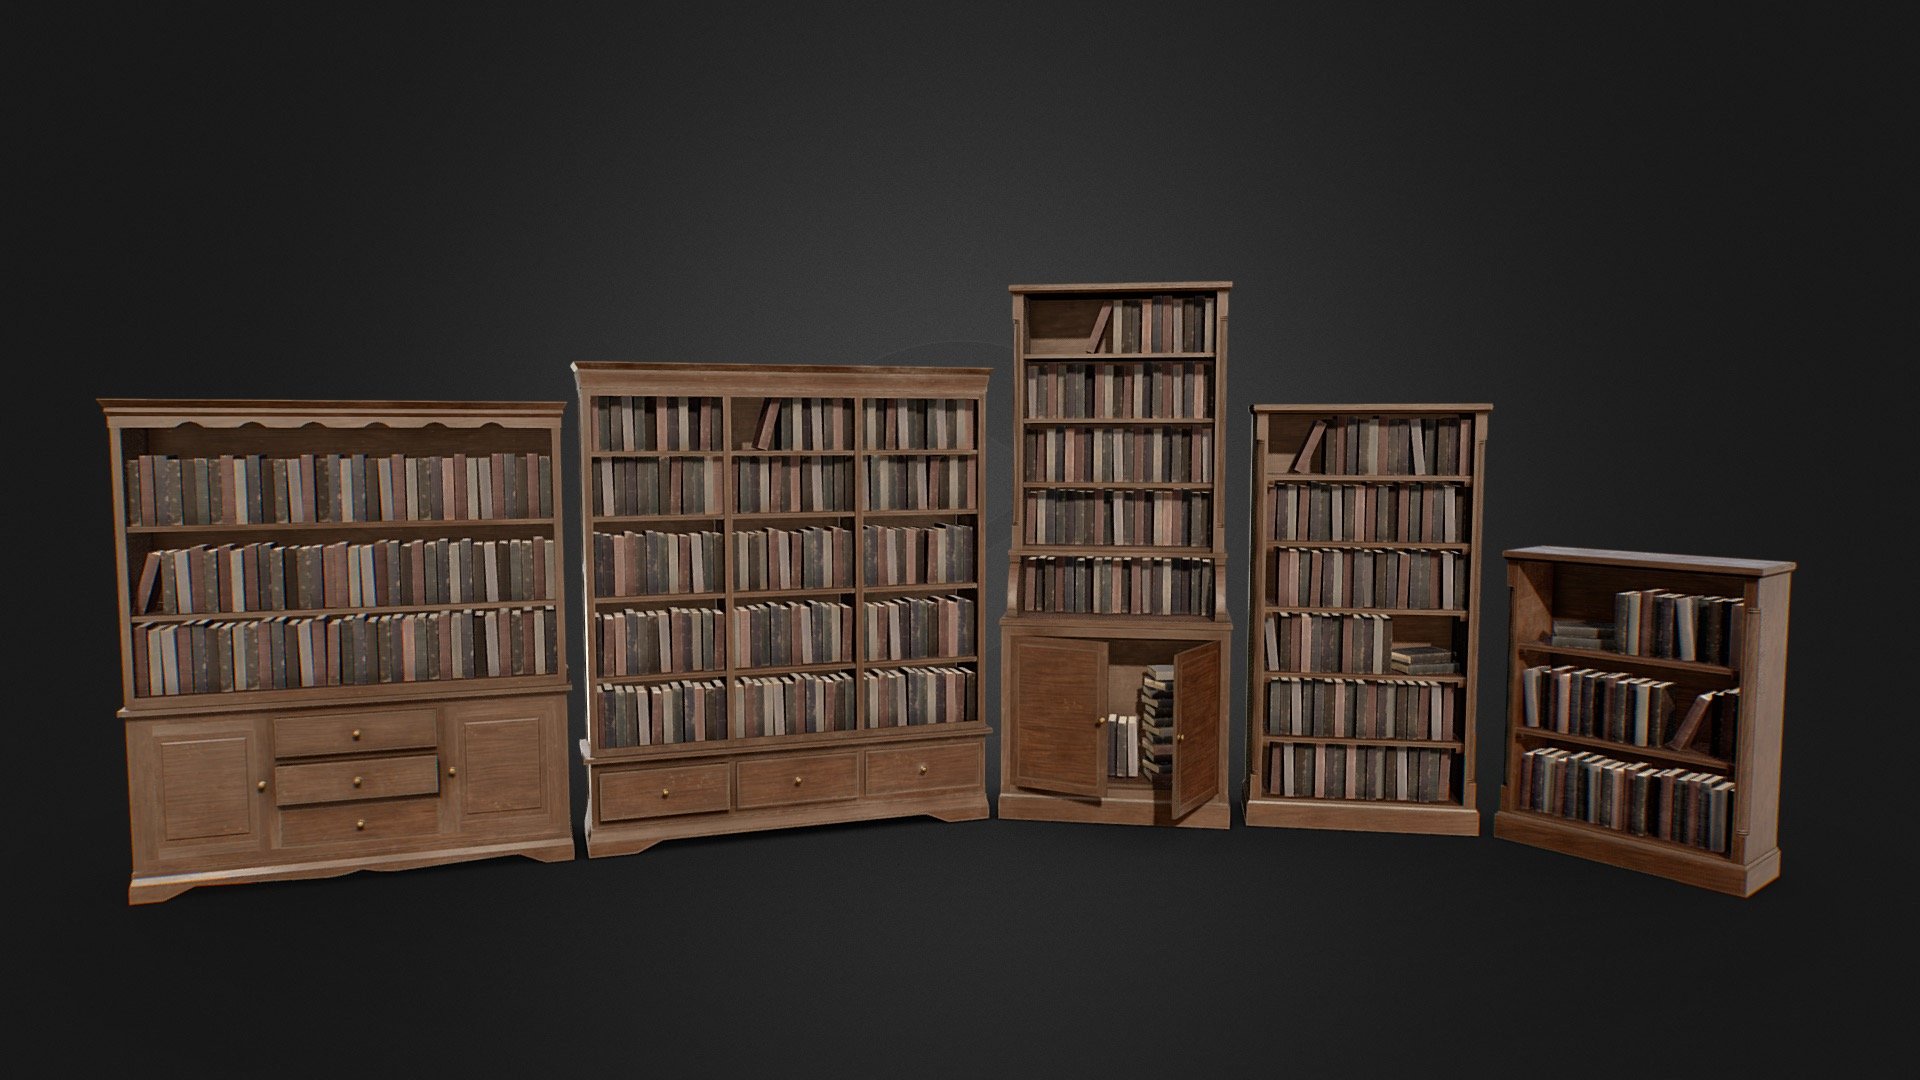 A collection of low-poly, game ready Victorian bookcases. The models look great in any environment and are suitable for use in game, VR, archviz and visual production.

Features




Collection includes 6 unique Victorian-themed bookcases with books.

The bookcase draws and cabinets can be opened and closed.

Models are low-poly and optimised for use in game, VR, archviz, and visual production.

Clean topology. Objects are grouped, named appropriately and unwrapped.

Modelled in Blender and textured in Substance Painter.

Triangle count ranges from 9,922 to 2,512. 32,840 total triangles; 21,341 total vertices.

Textures

5 PBR texture sets. Textures are in .png at 4096x4096 and includes: Base Colour, Metallic, Roughness, Normal 3d model